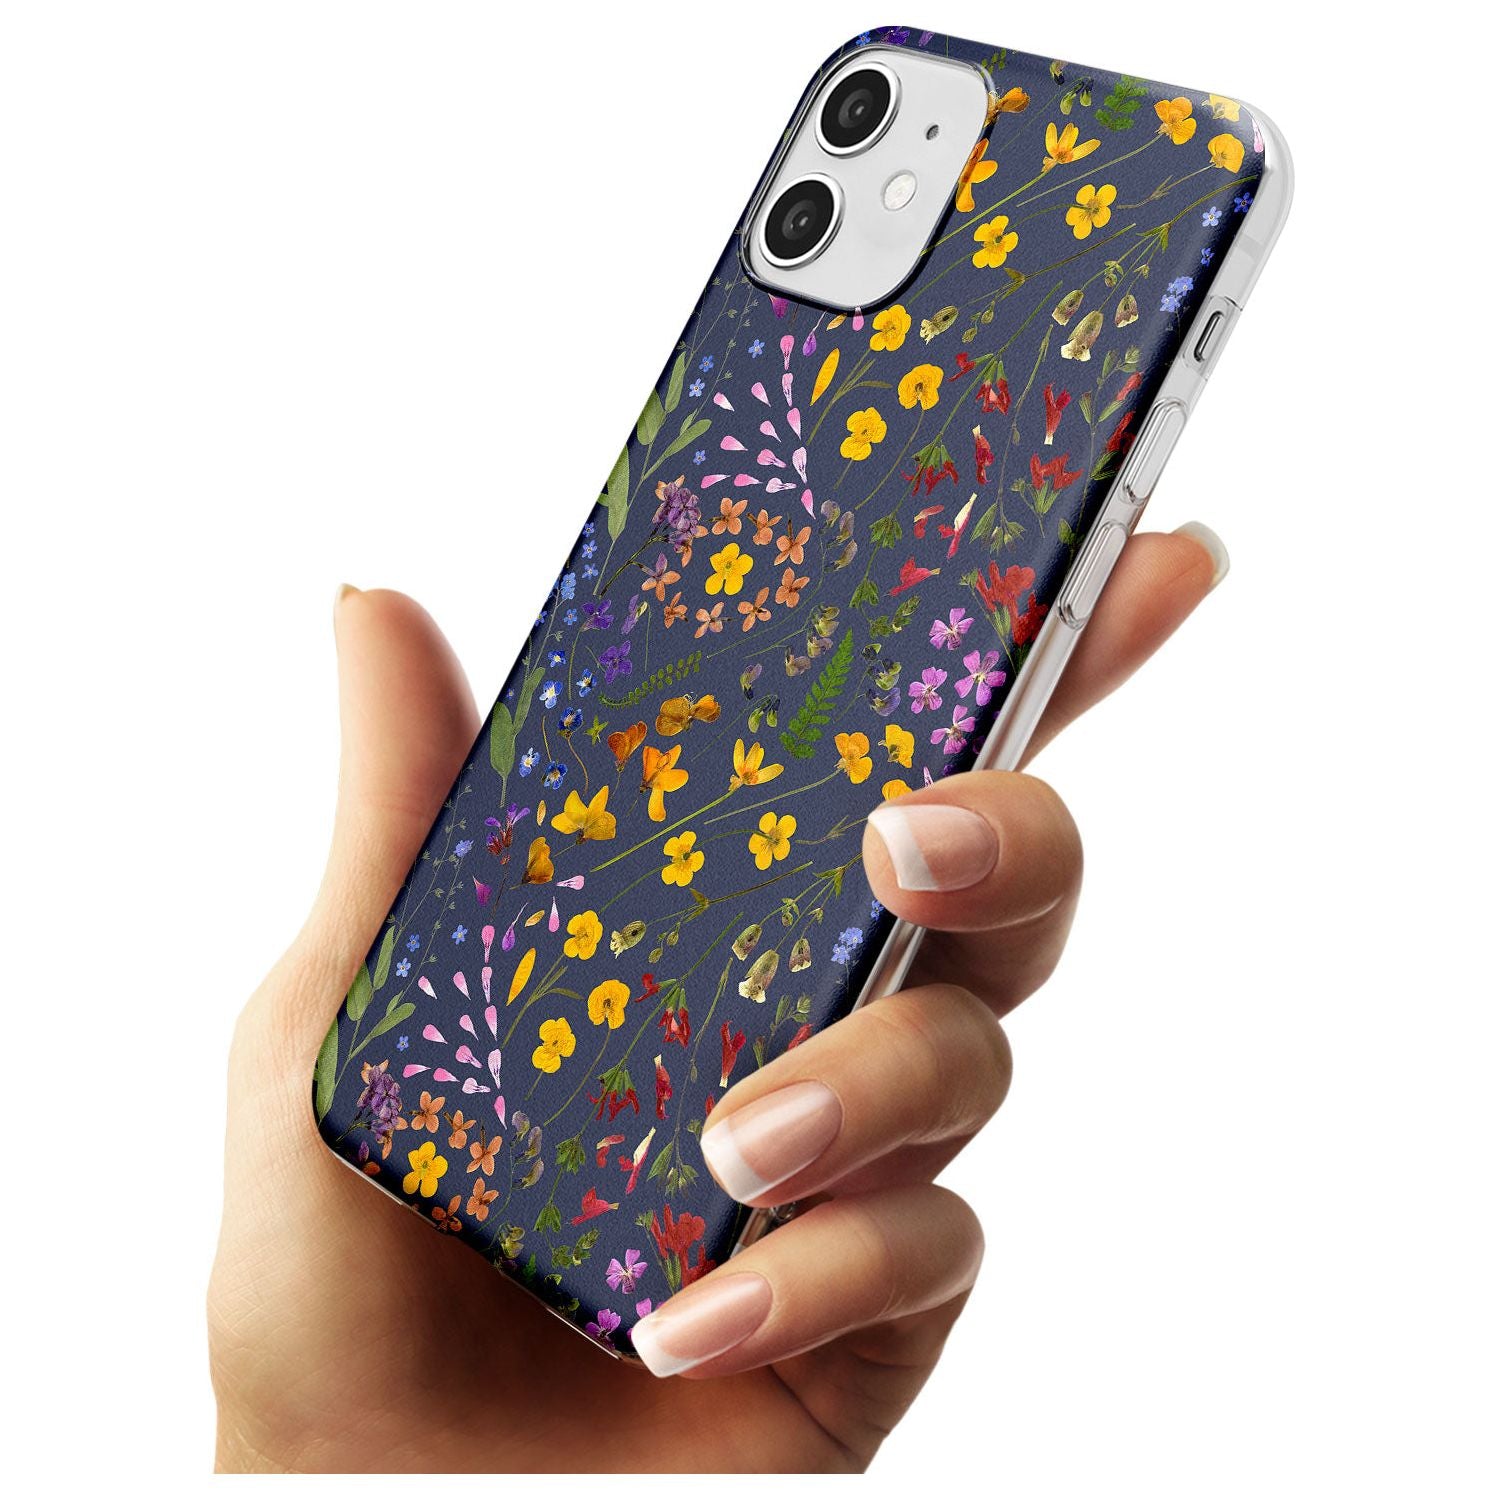 Wildflower & Leaves Cluster Design - Navy Slim TPU Phone Case for iPhone 11